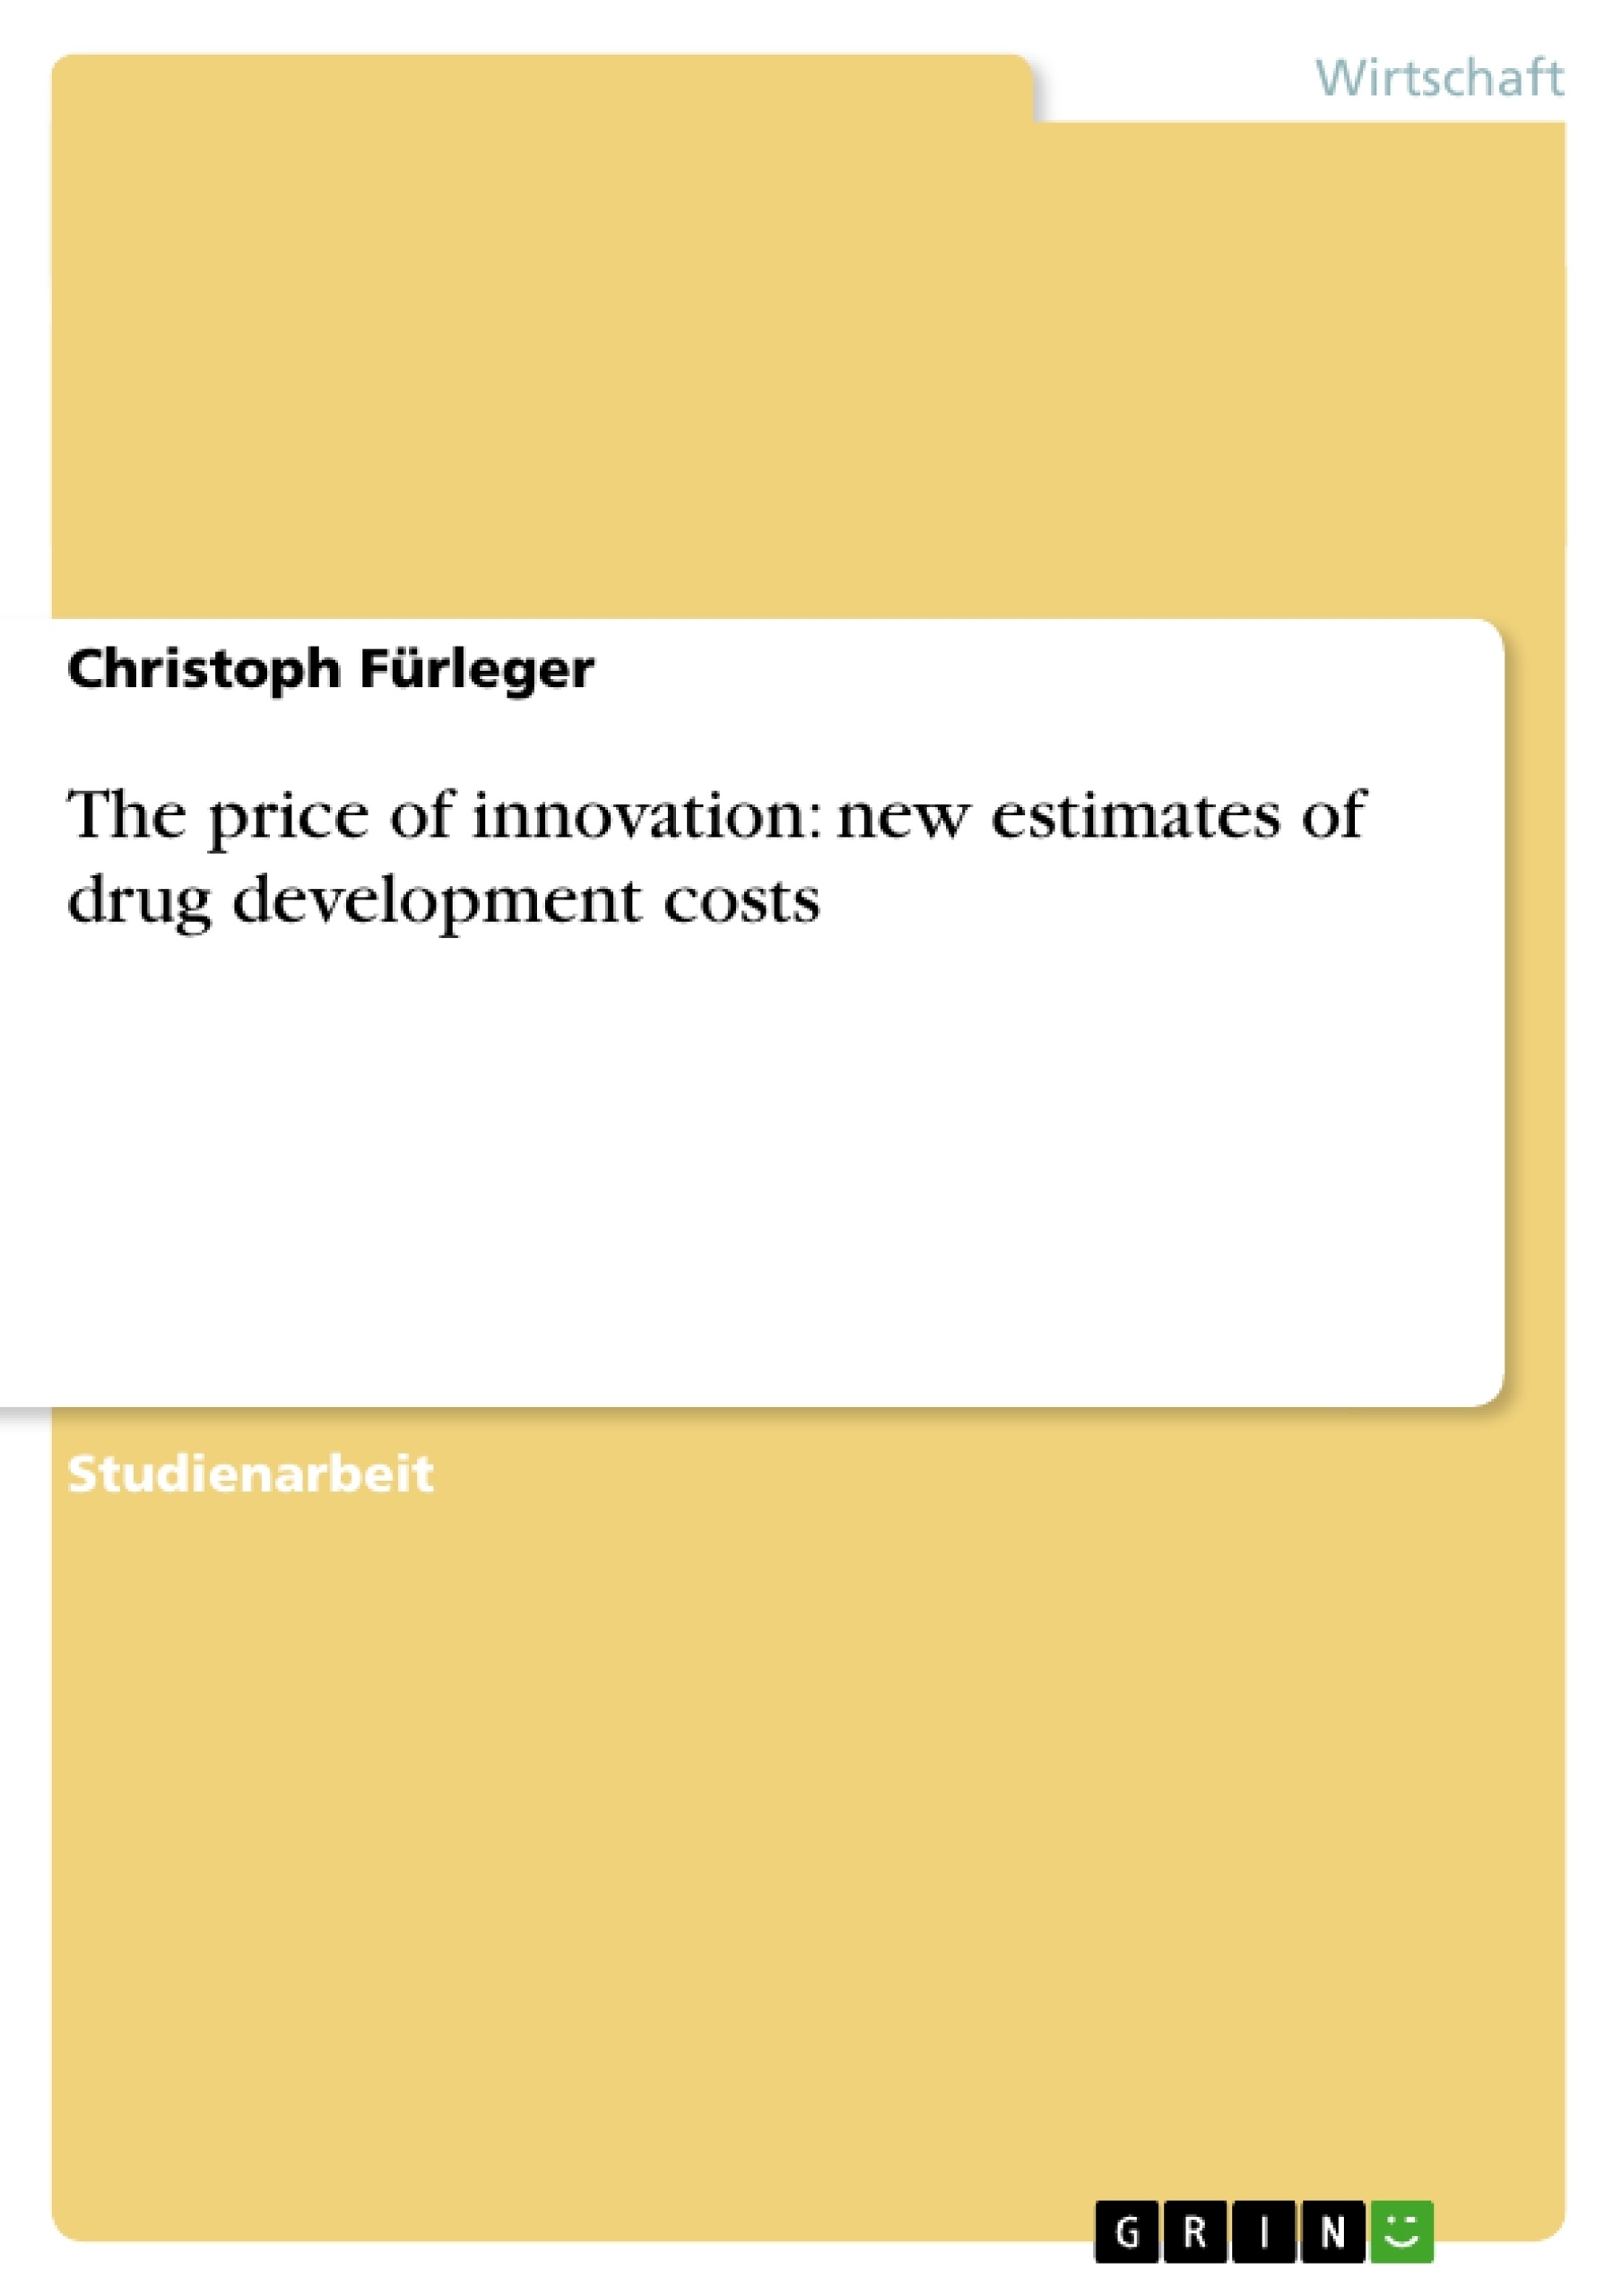 Título: The price of innovation: new estimates of drug development costs